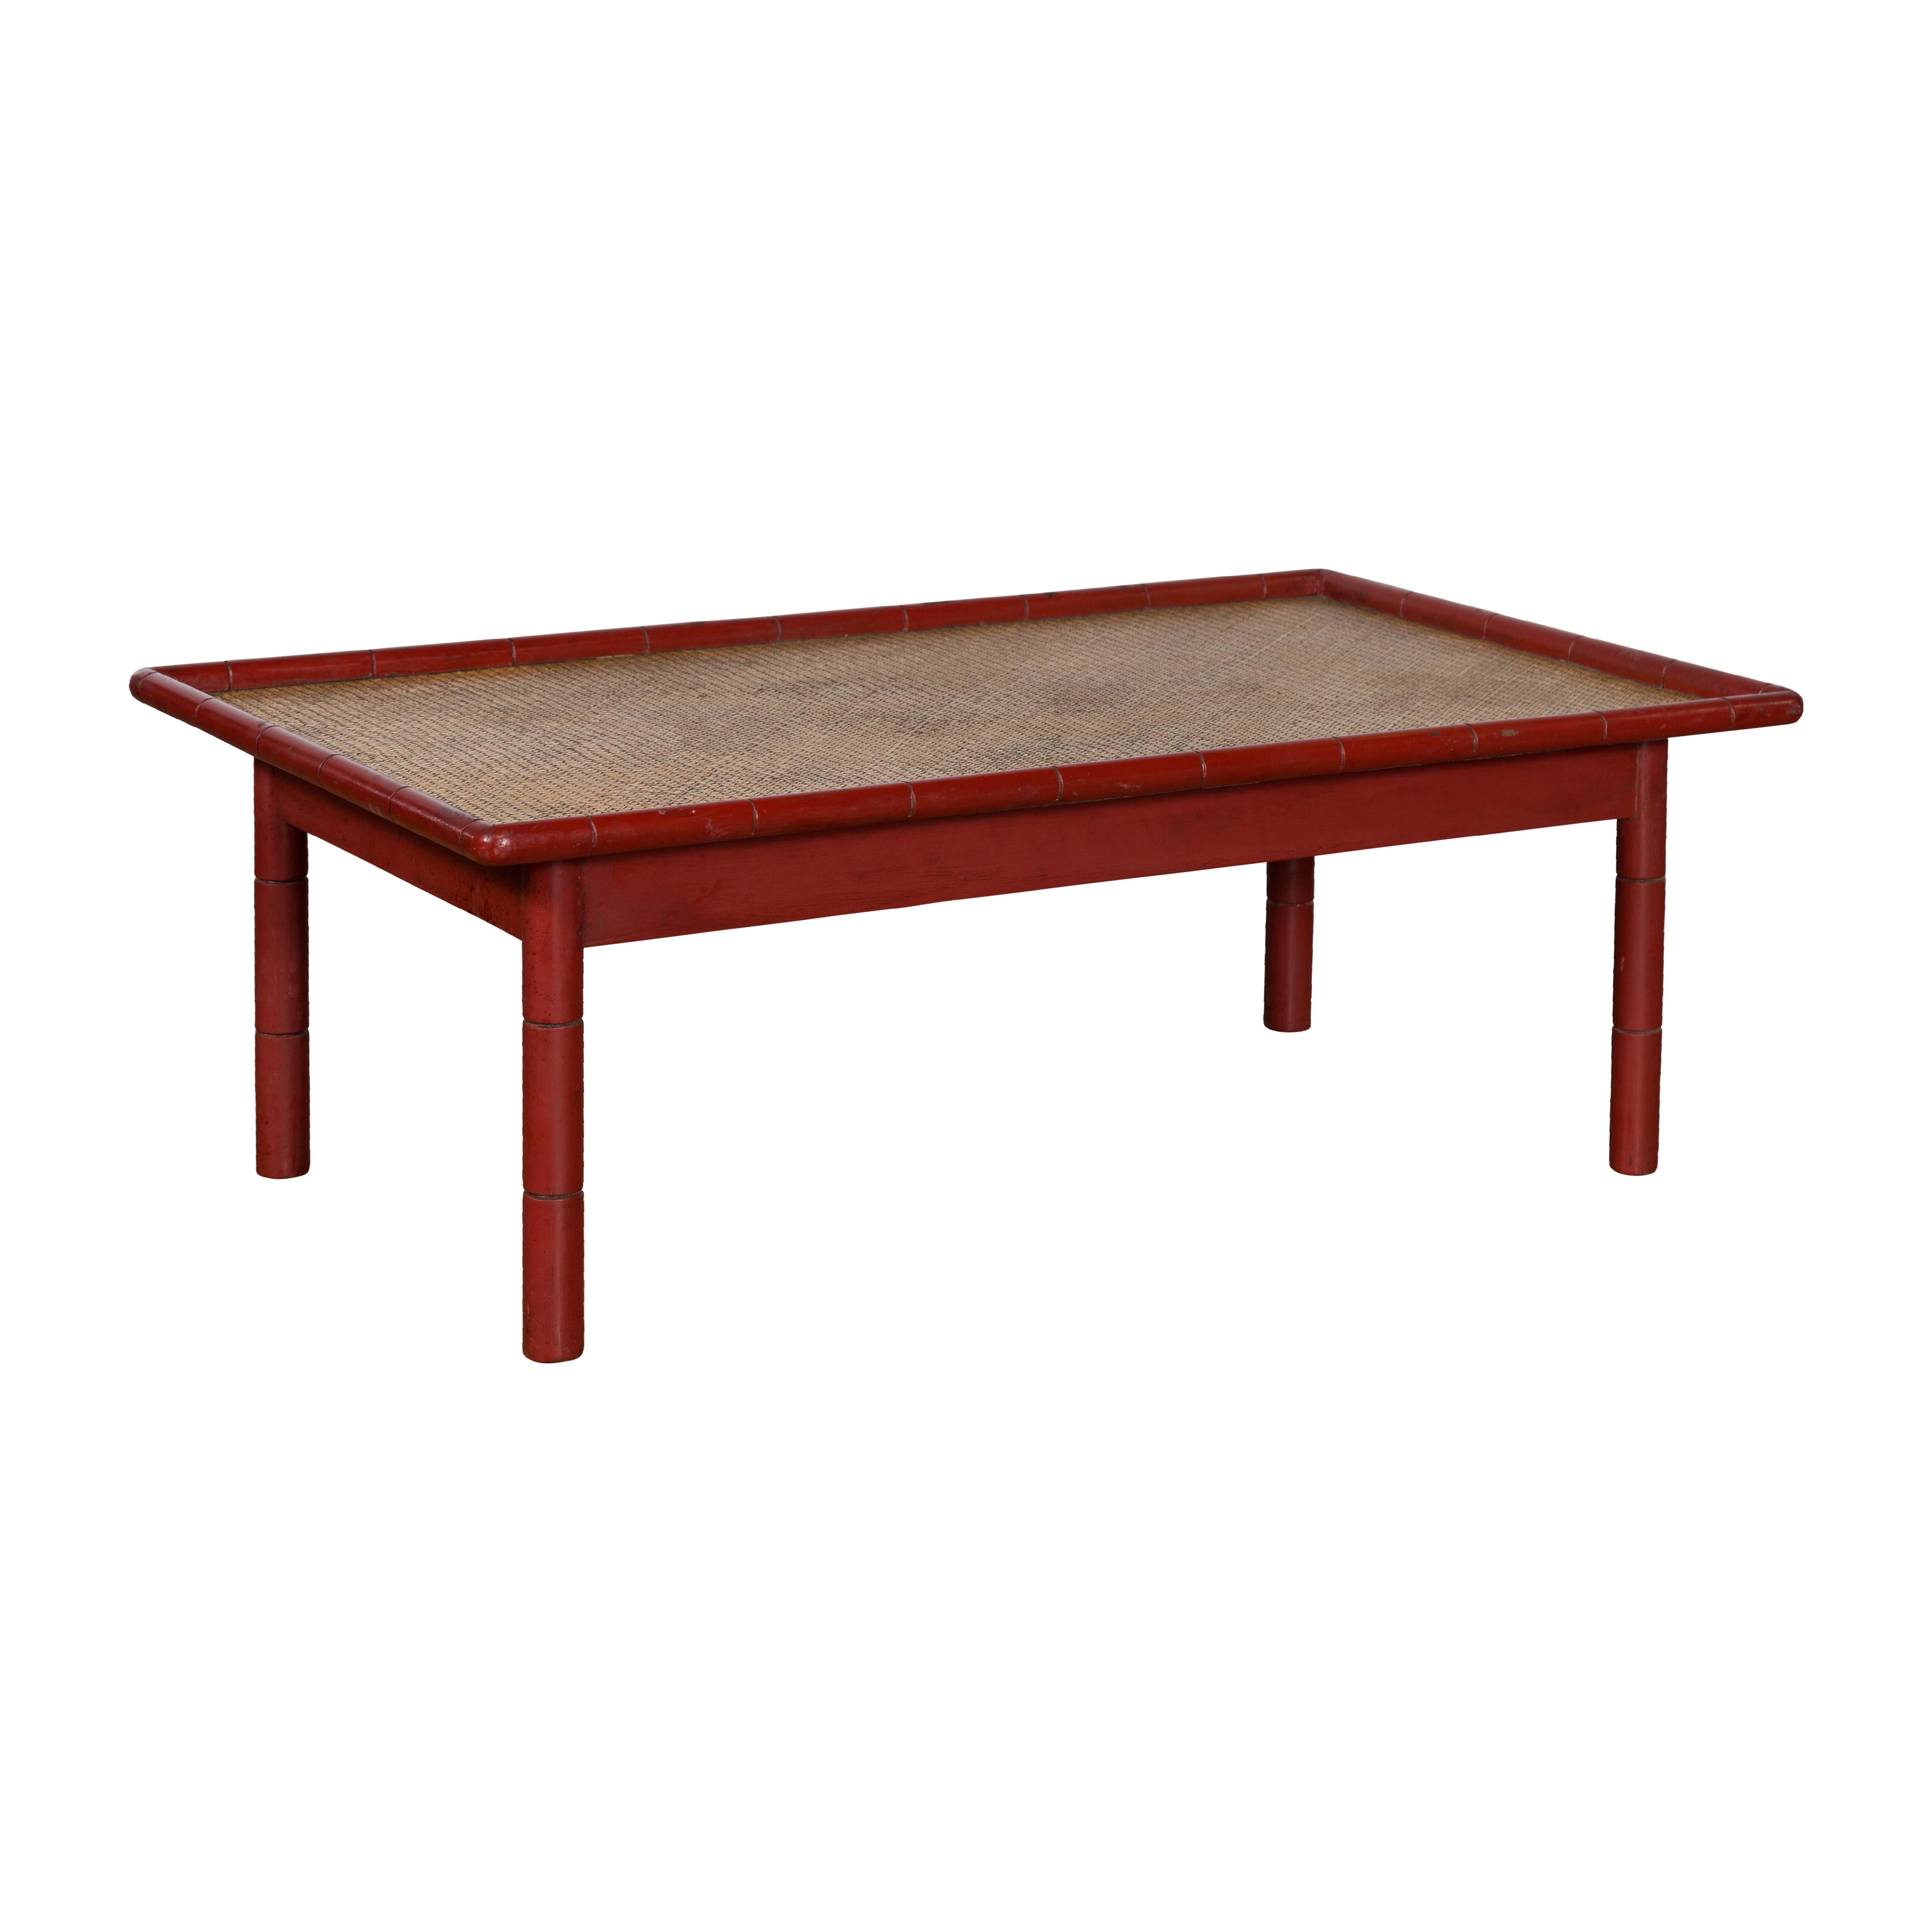 Vintage Burmese Red Lacquered Faux Bamboo Coffee Table with Woven Rattan Top For Sale 9